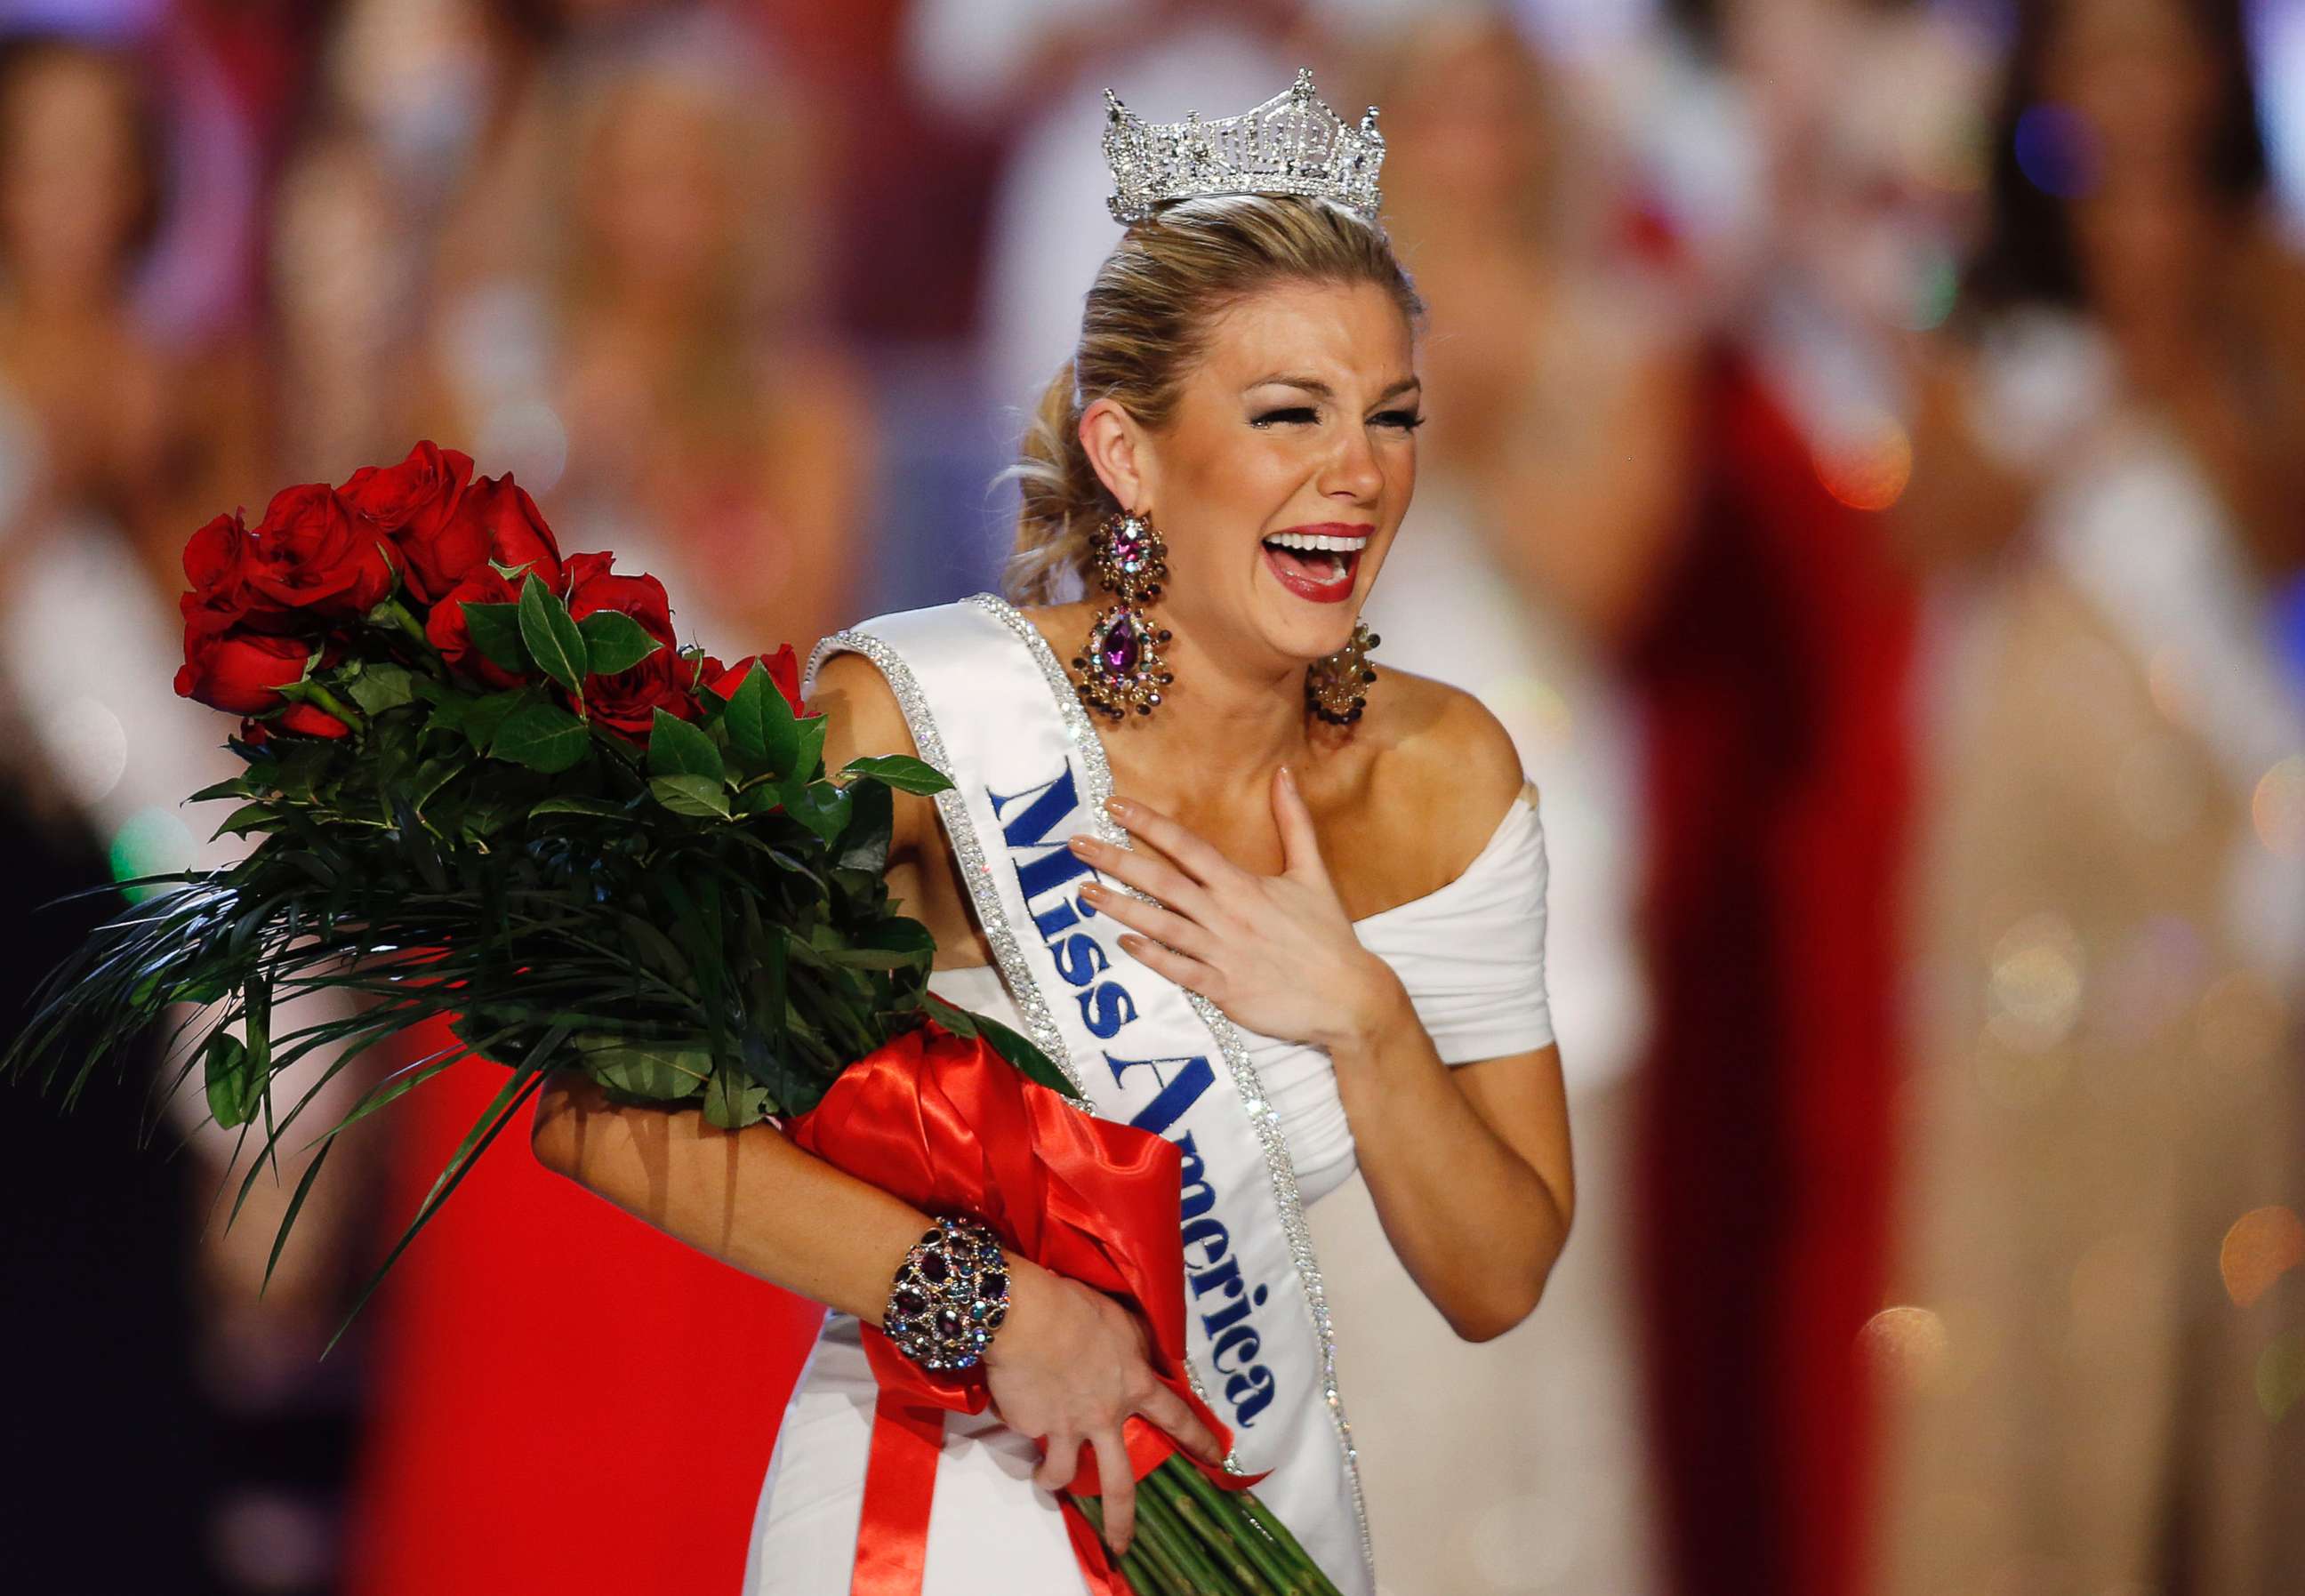 PHOTO: Miss New York Mallory Hytes Hagan reacts as she is crowned Miss America 2013 in this Jan. 12, 2013 file photo in Las Vegas.